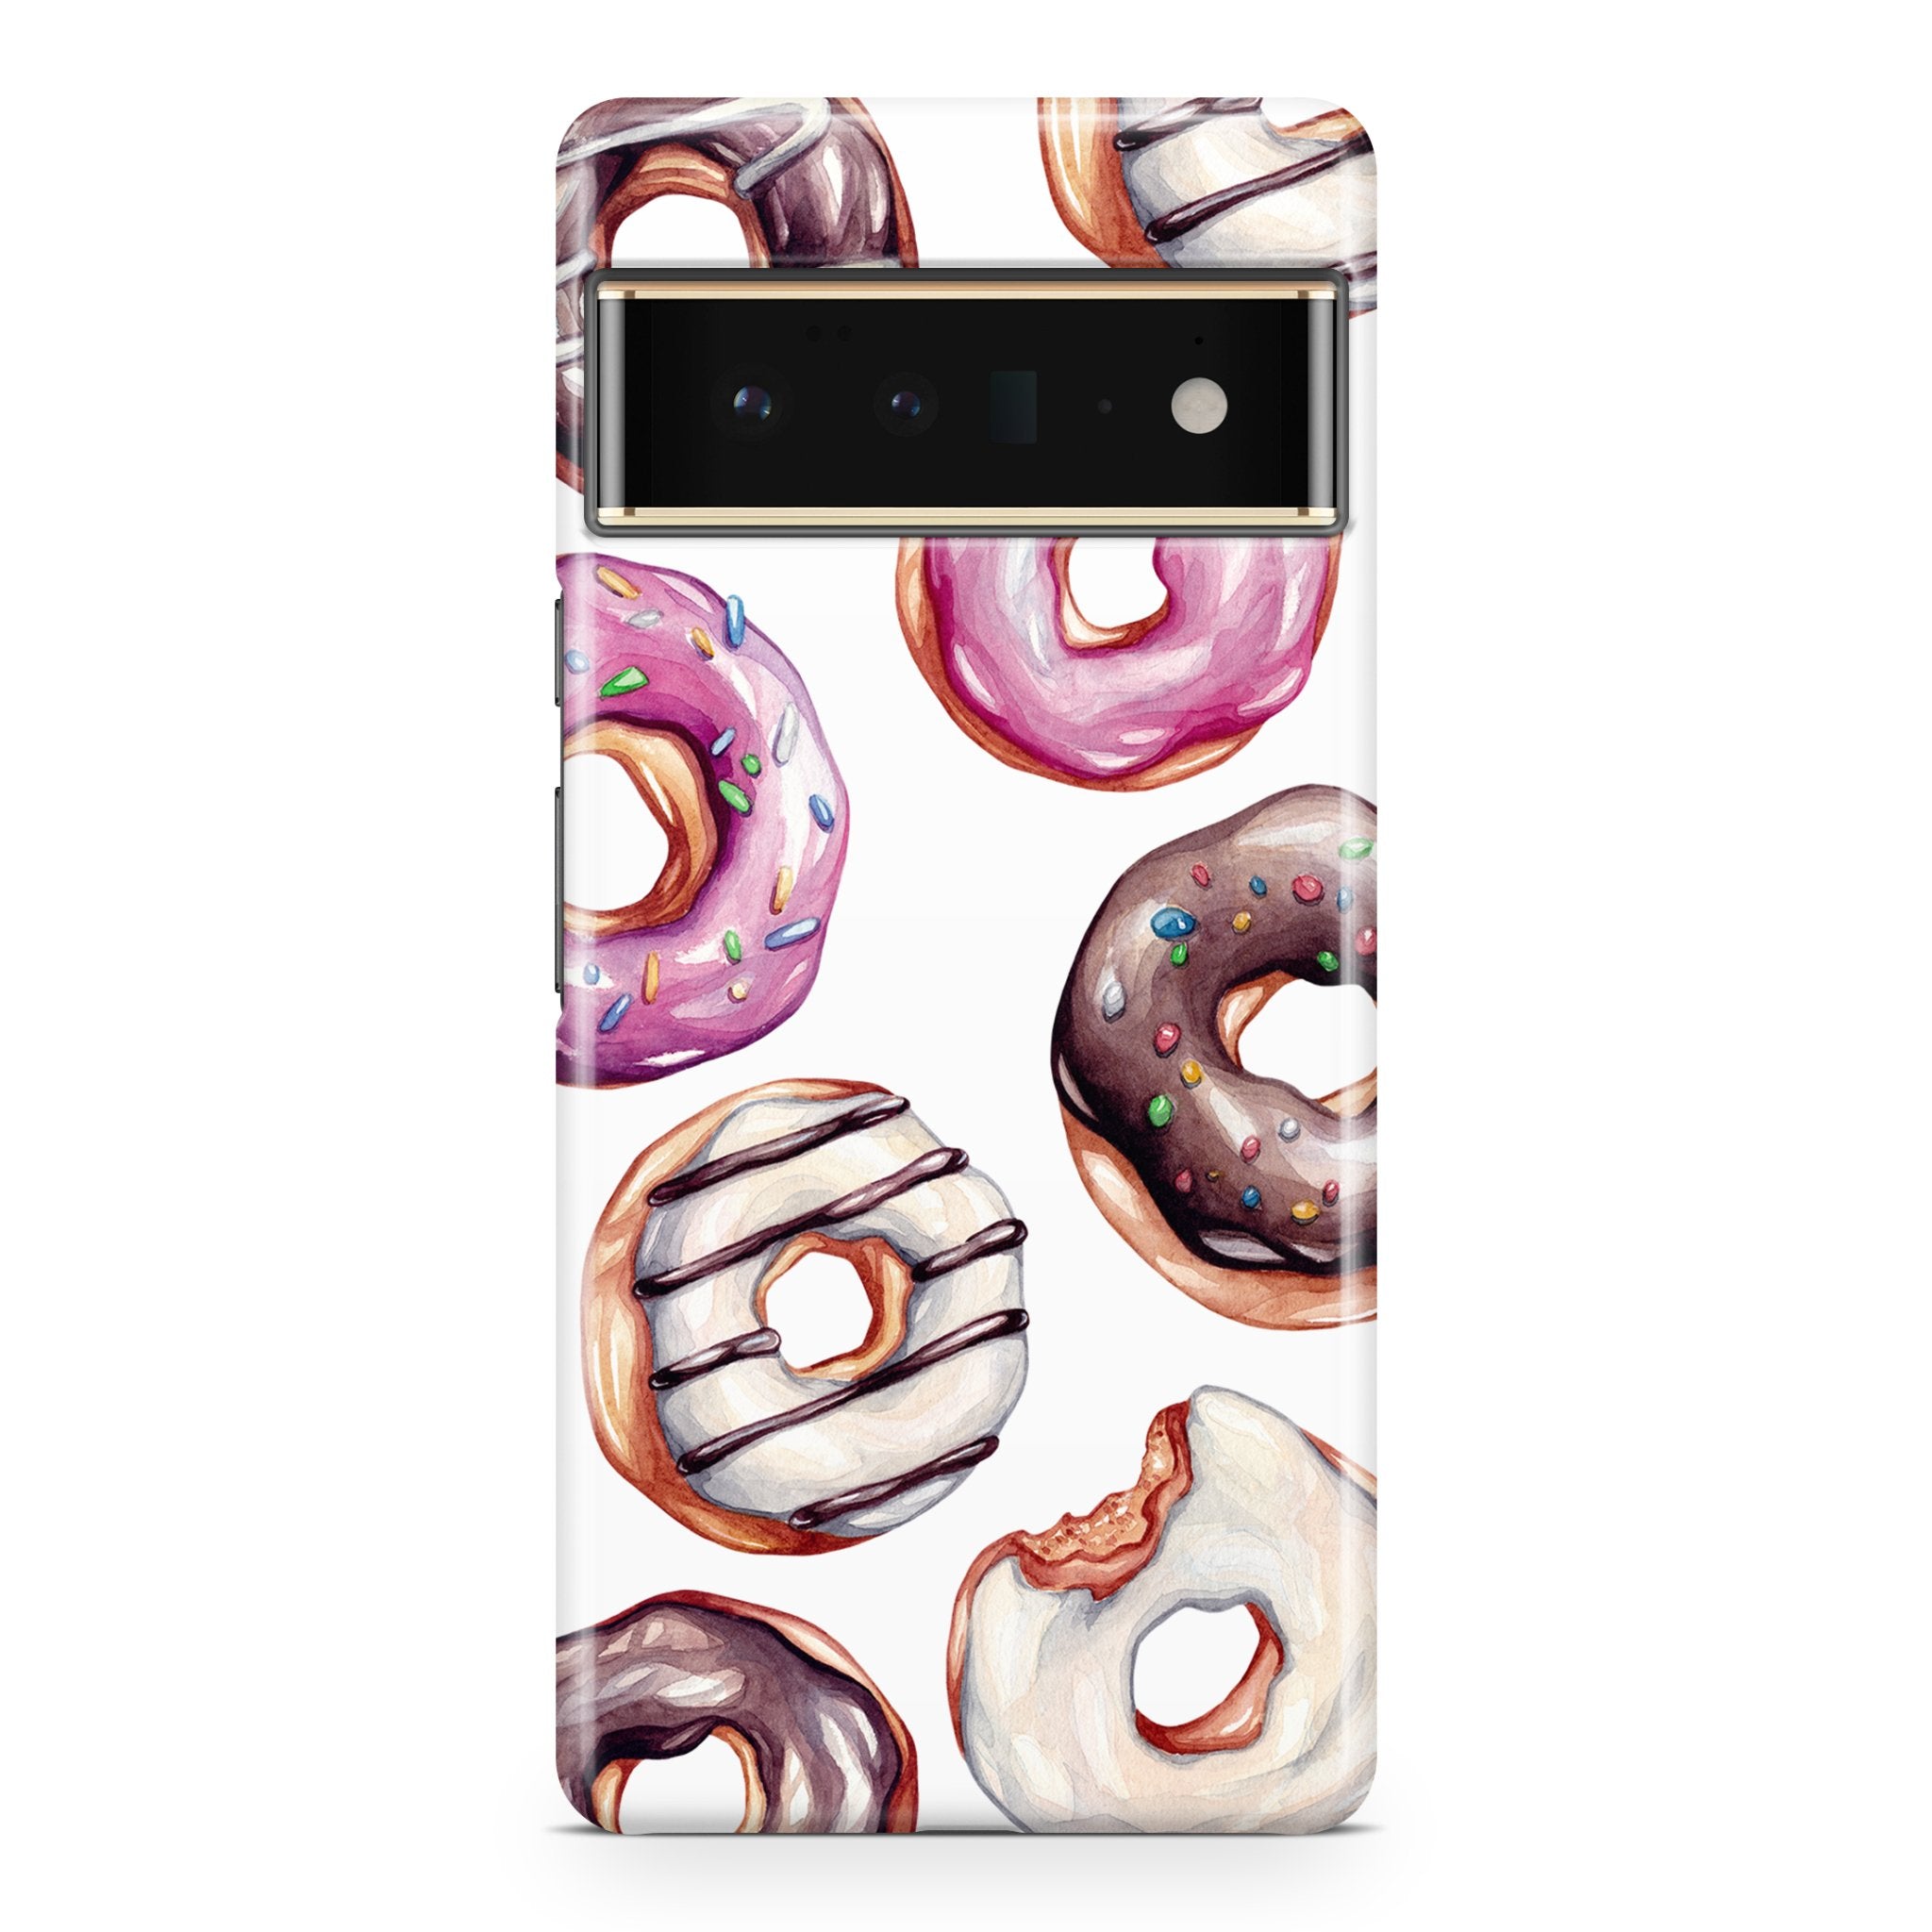 Donuts - Google phone case designs by CaseSwagger